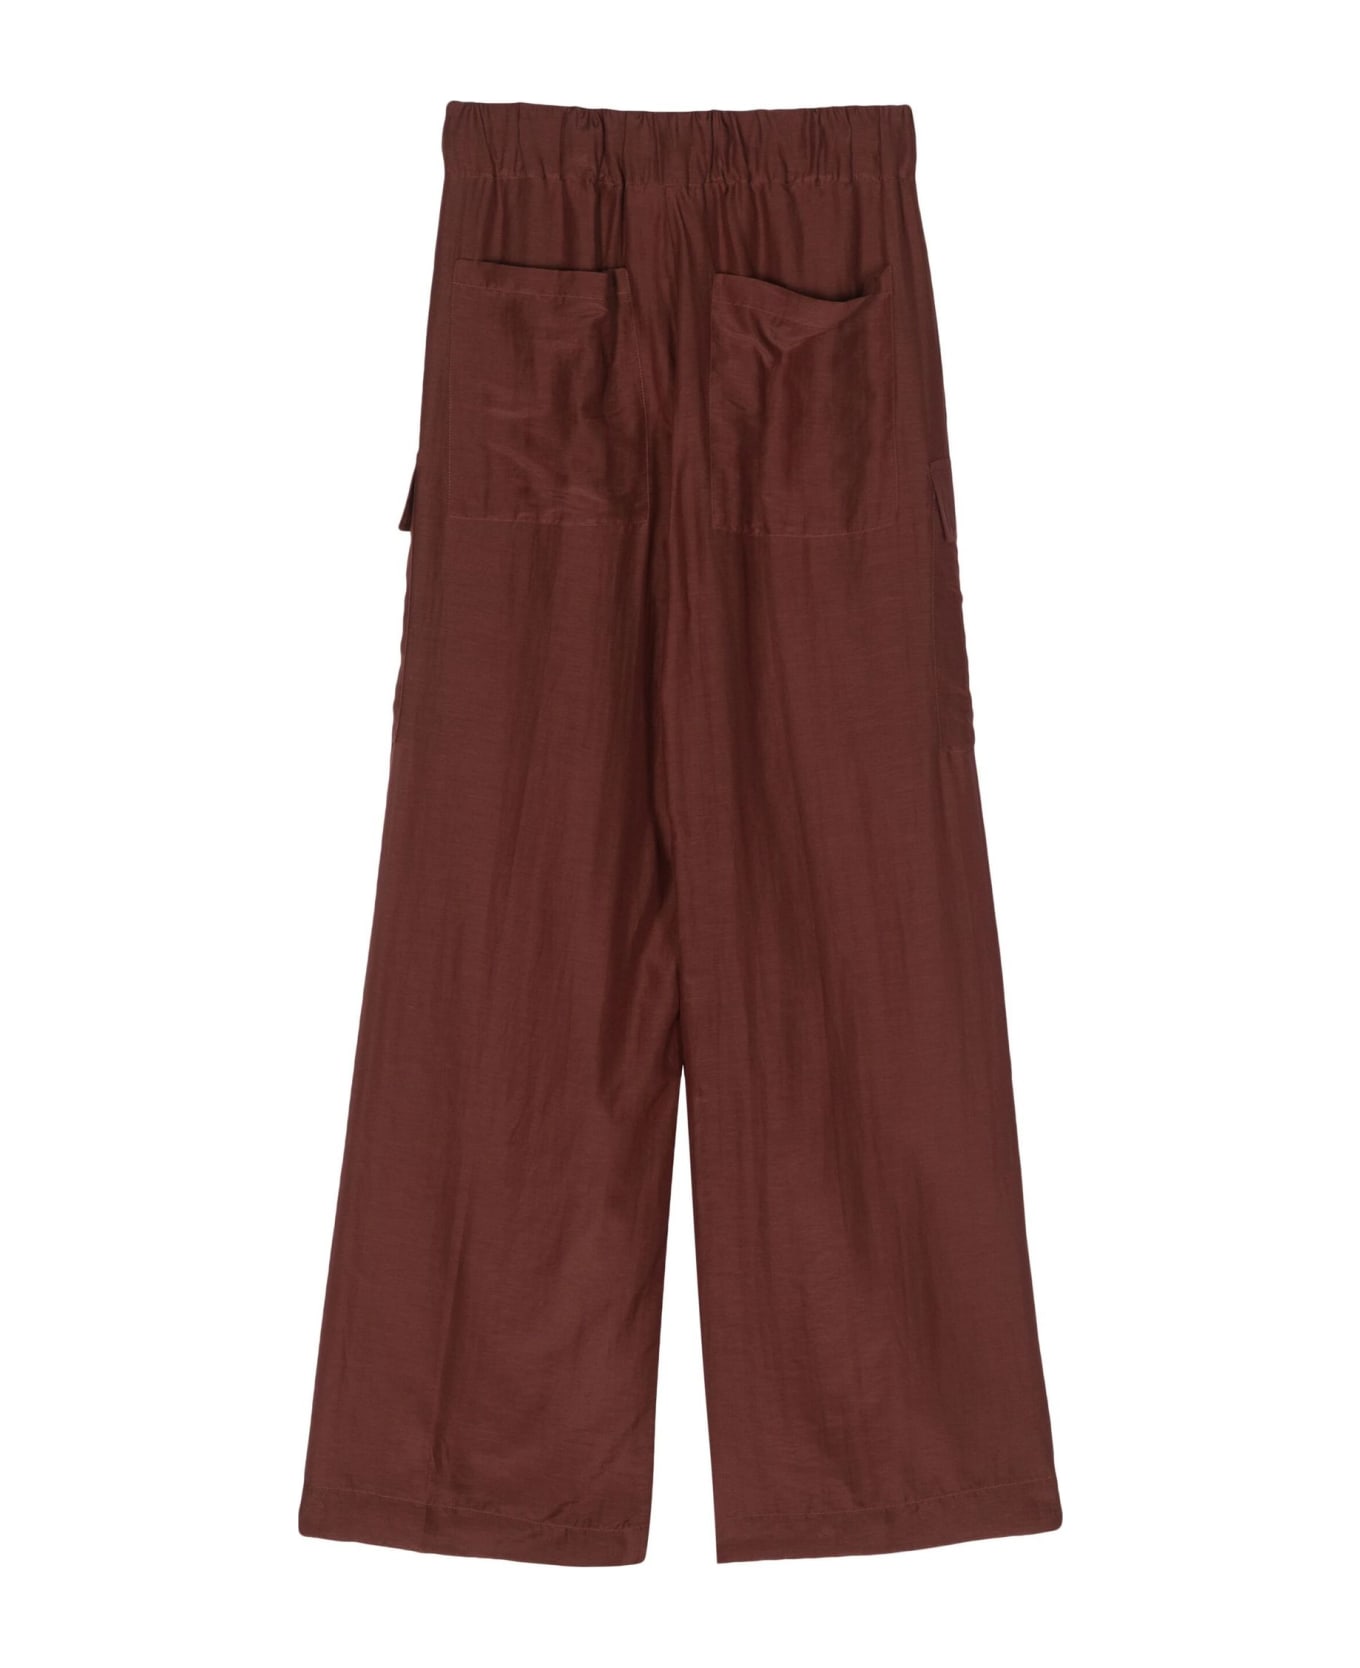 SEMICOUTURE Brown Cotton-silk Blend Trousers - Brown ボトムス